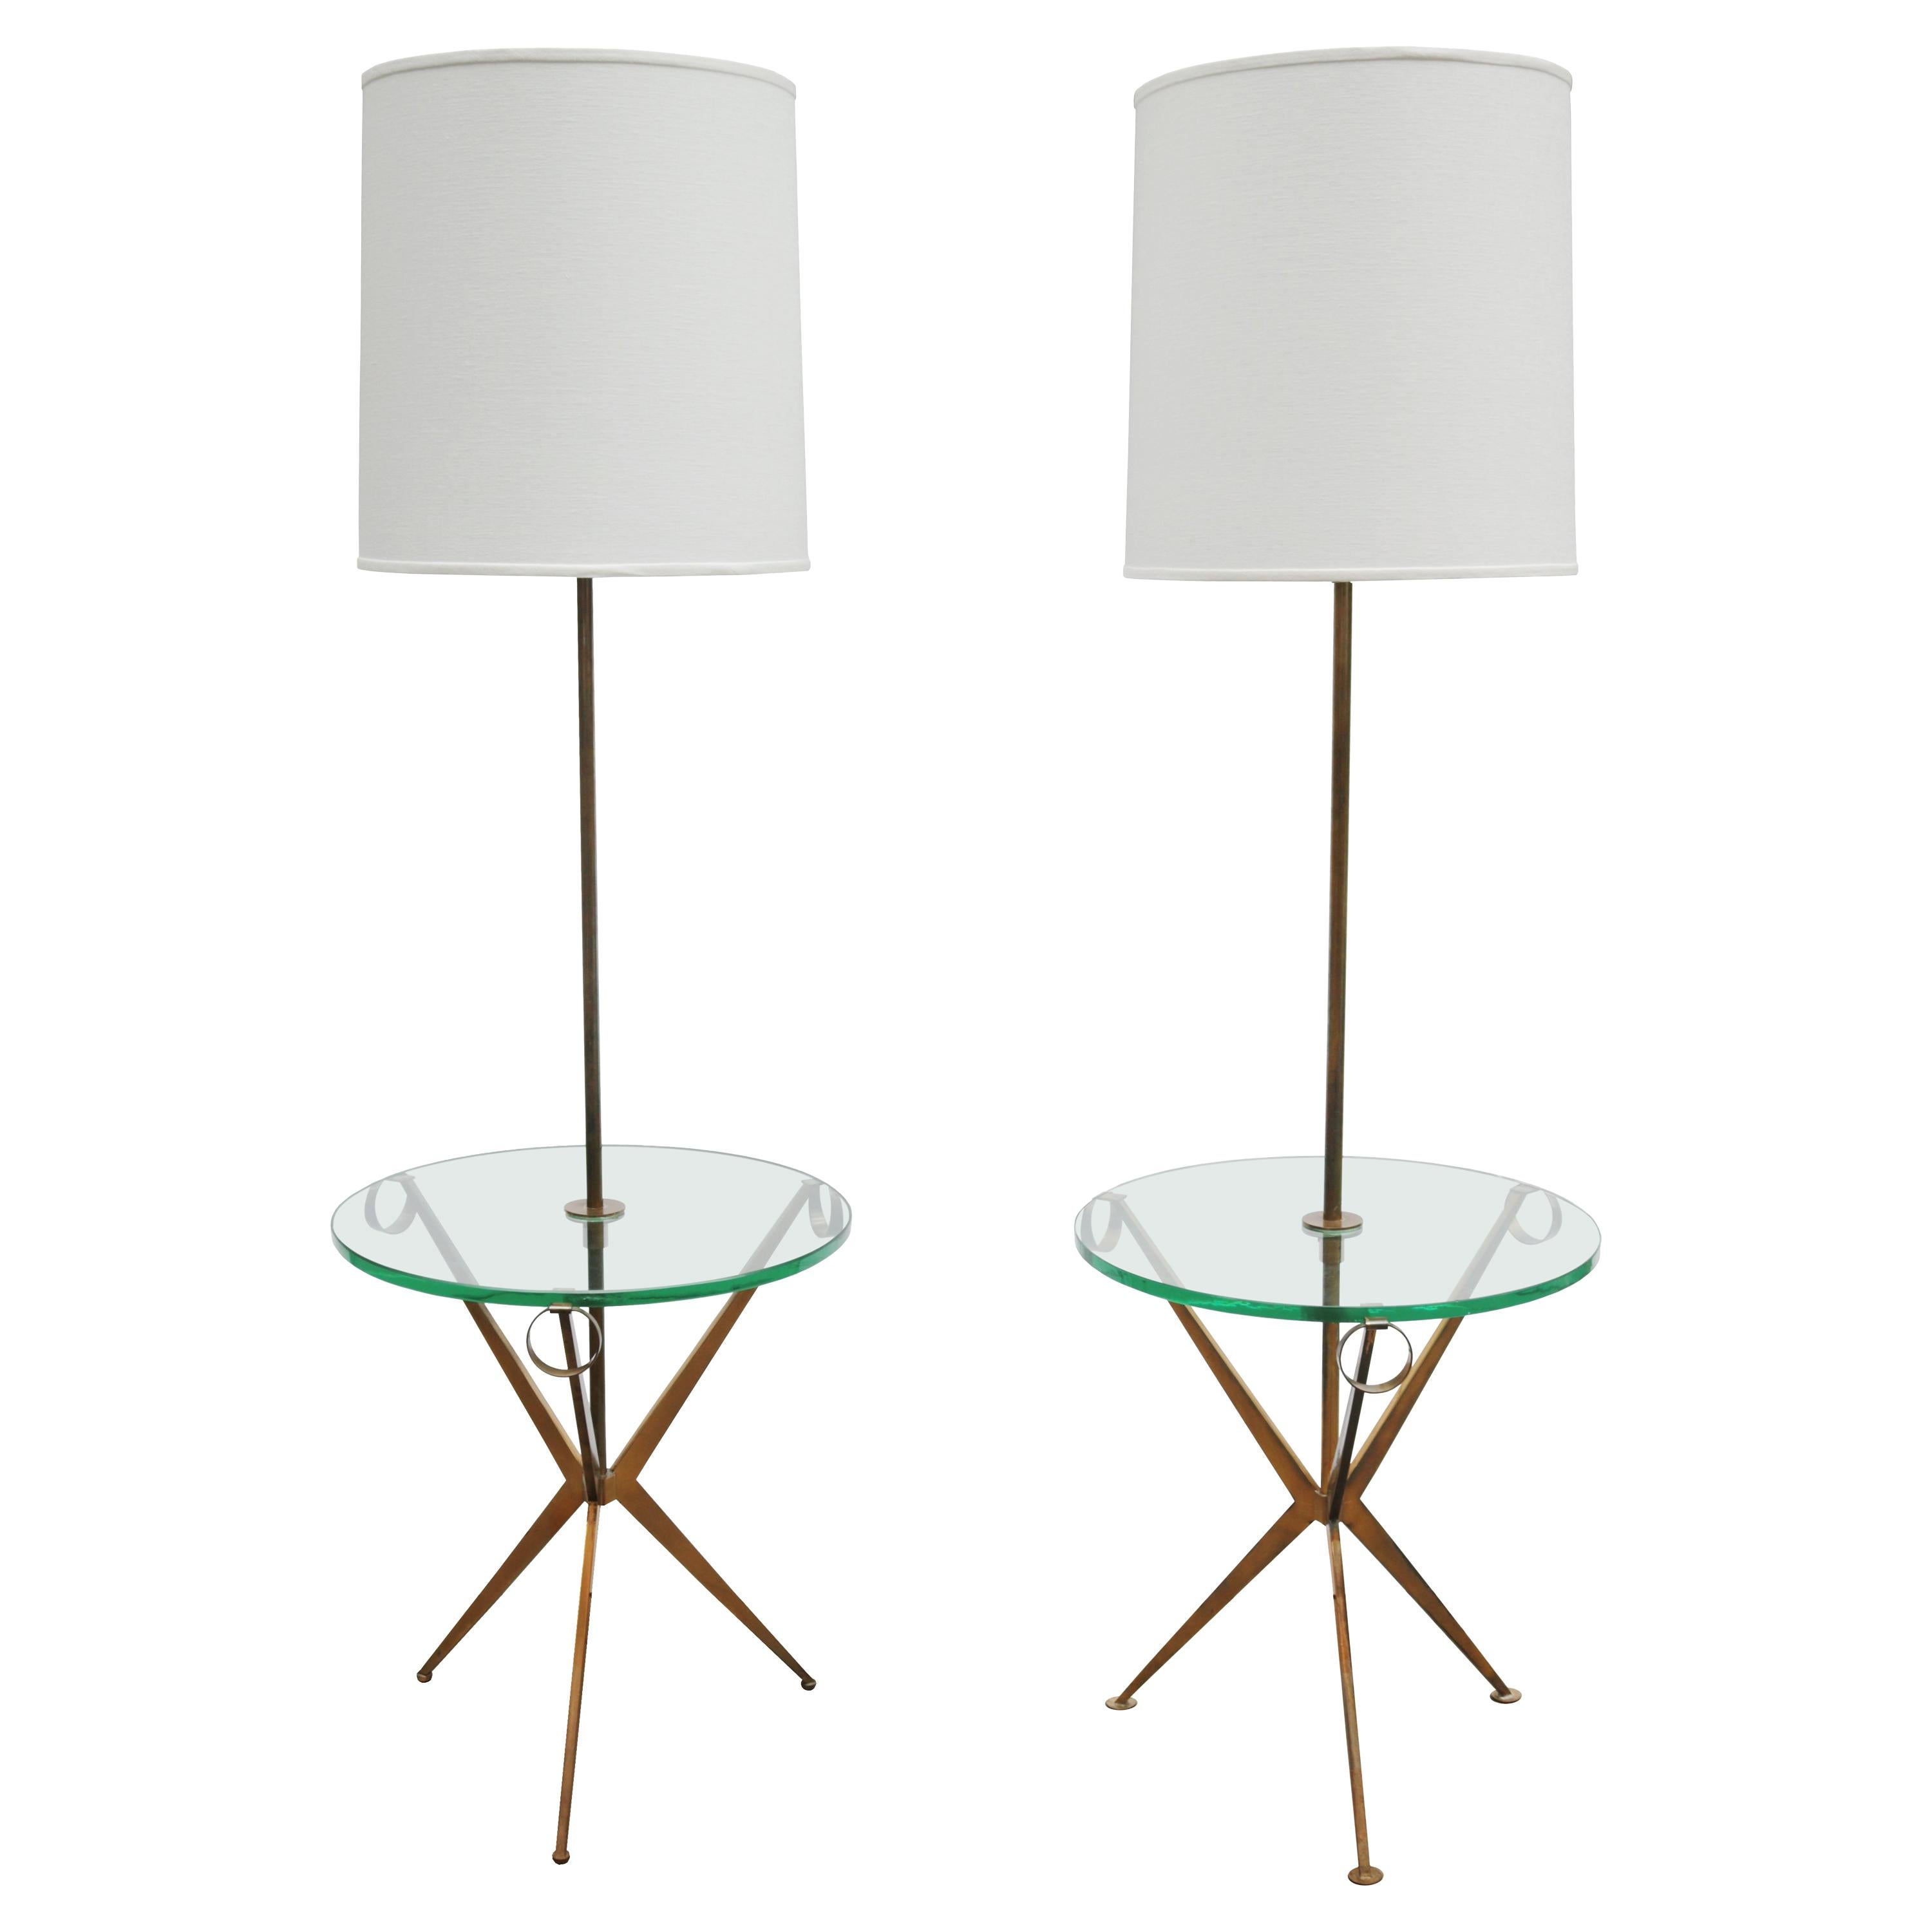 Matched Pair of Modernist Floor Lamp Tables Attributed to Paul McCobb